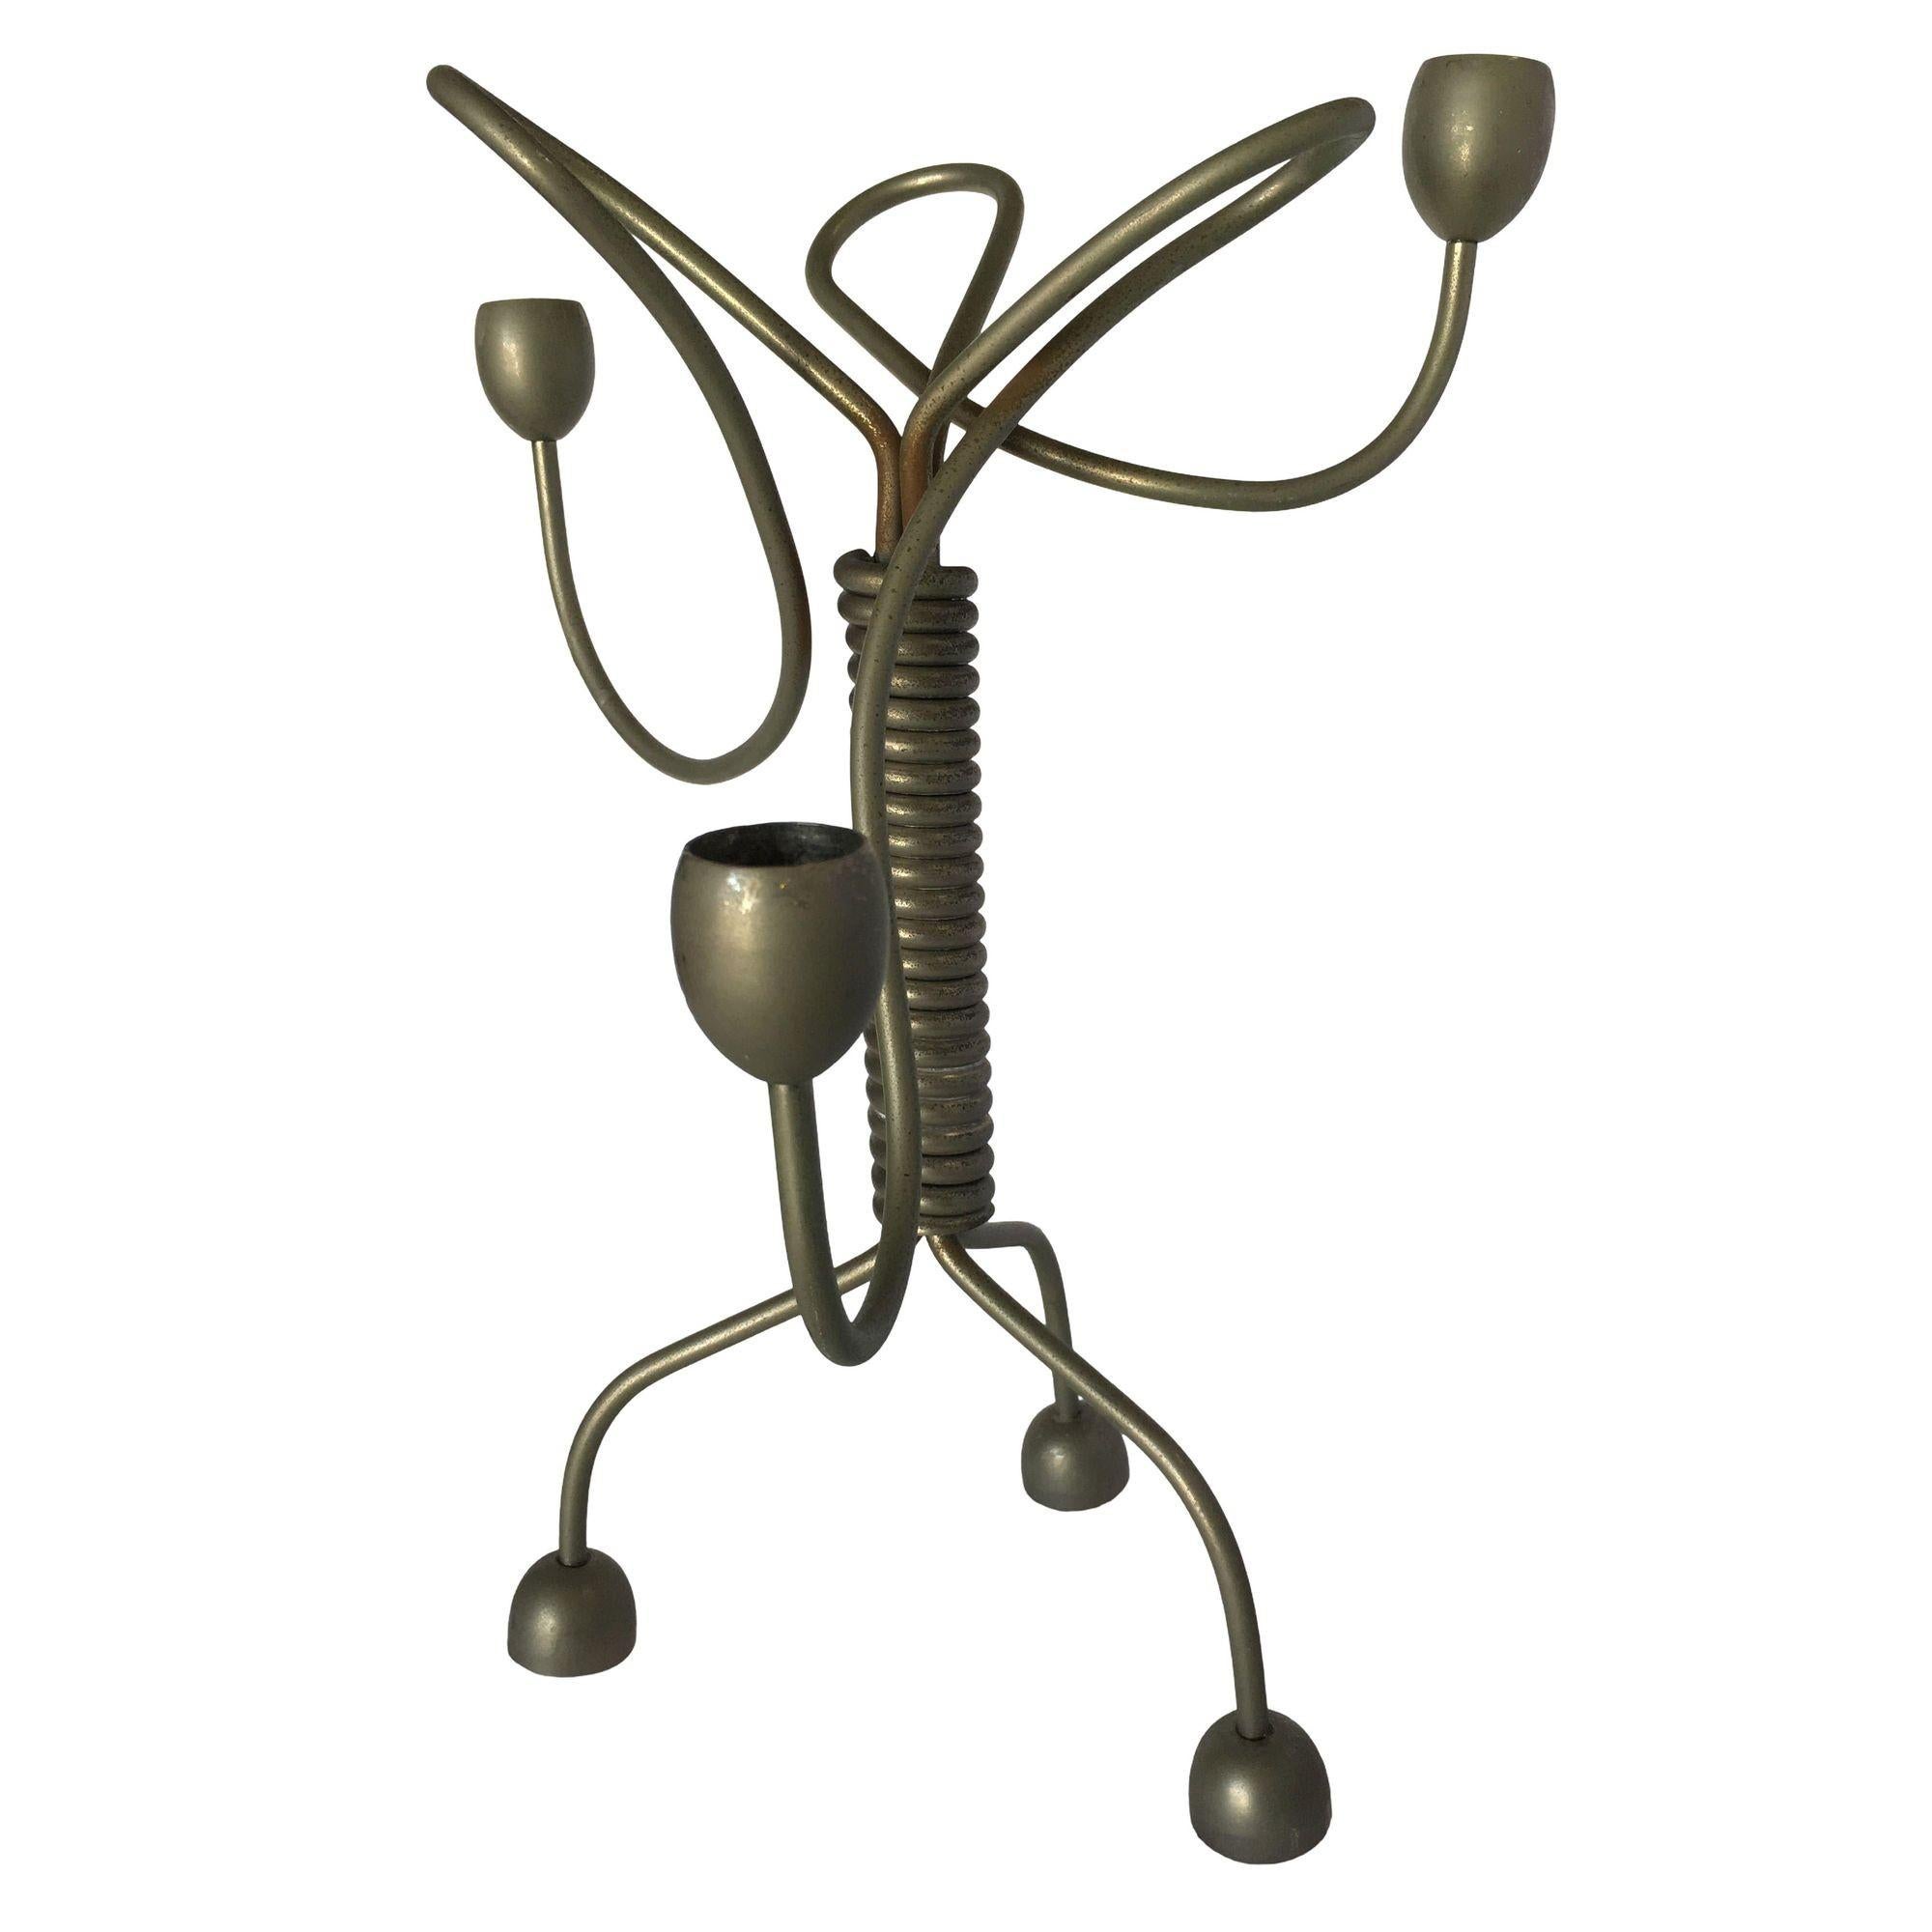 Unsigned custom made coiled wire abstract candelabra featuring 3 candleholders on 3 asymmetric freeform arms flowing out of a coiled center resting on 3 legs, circa 1960.